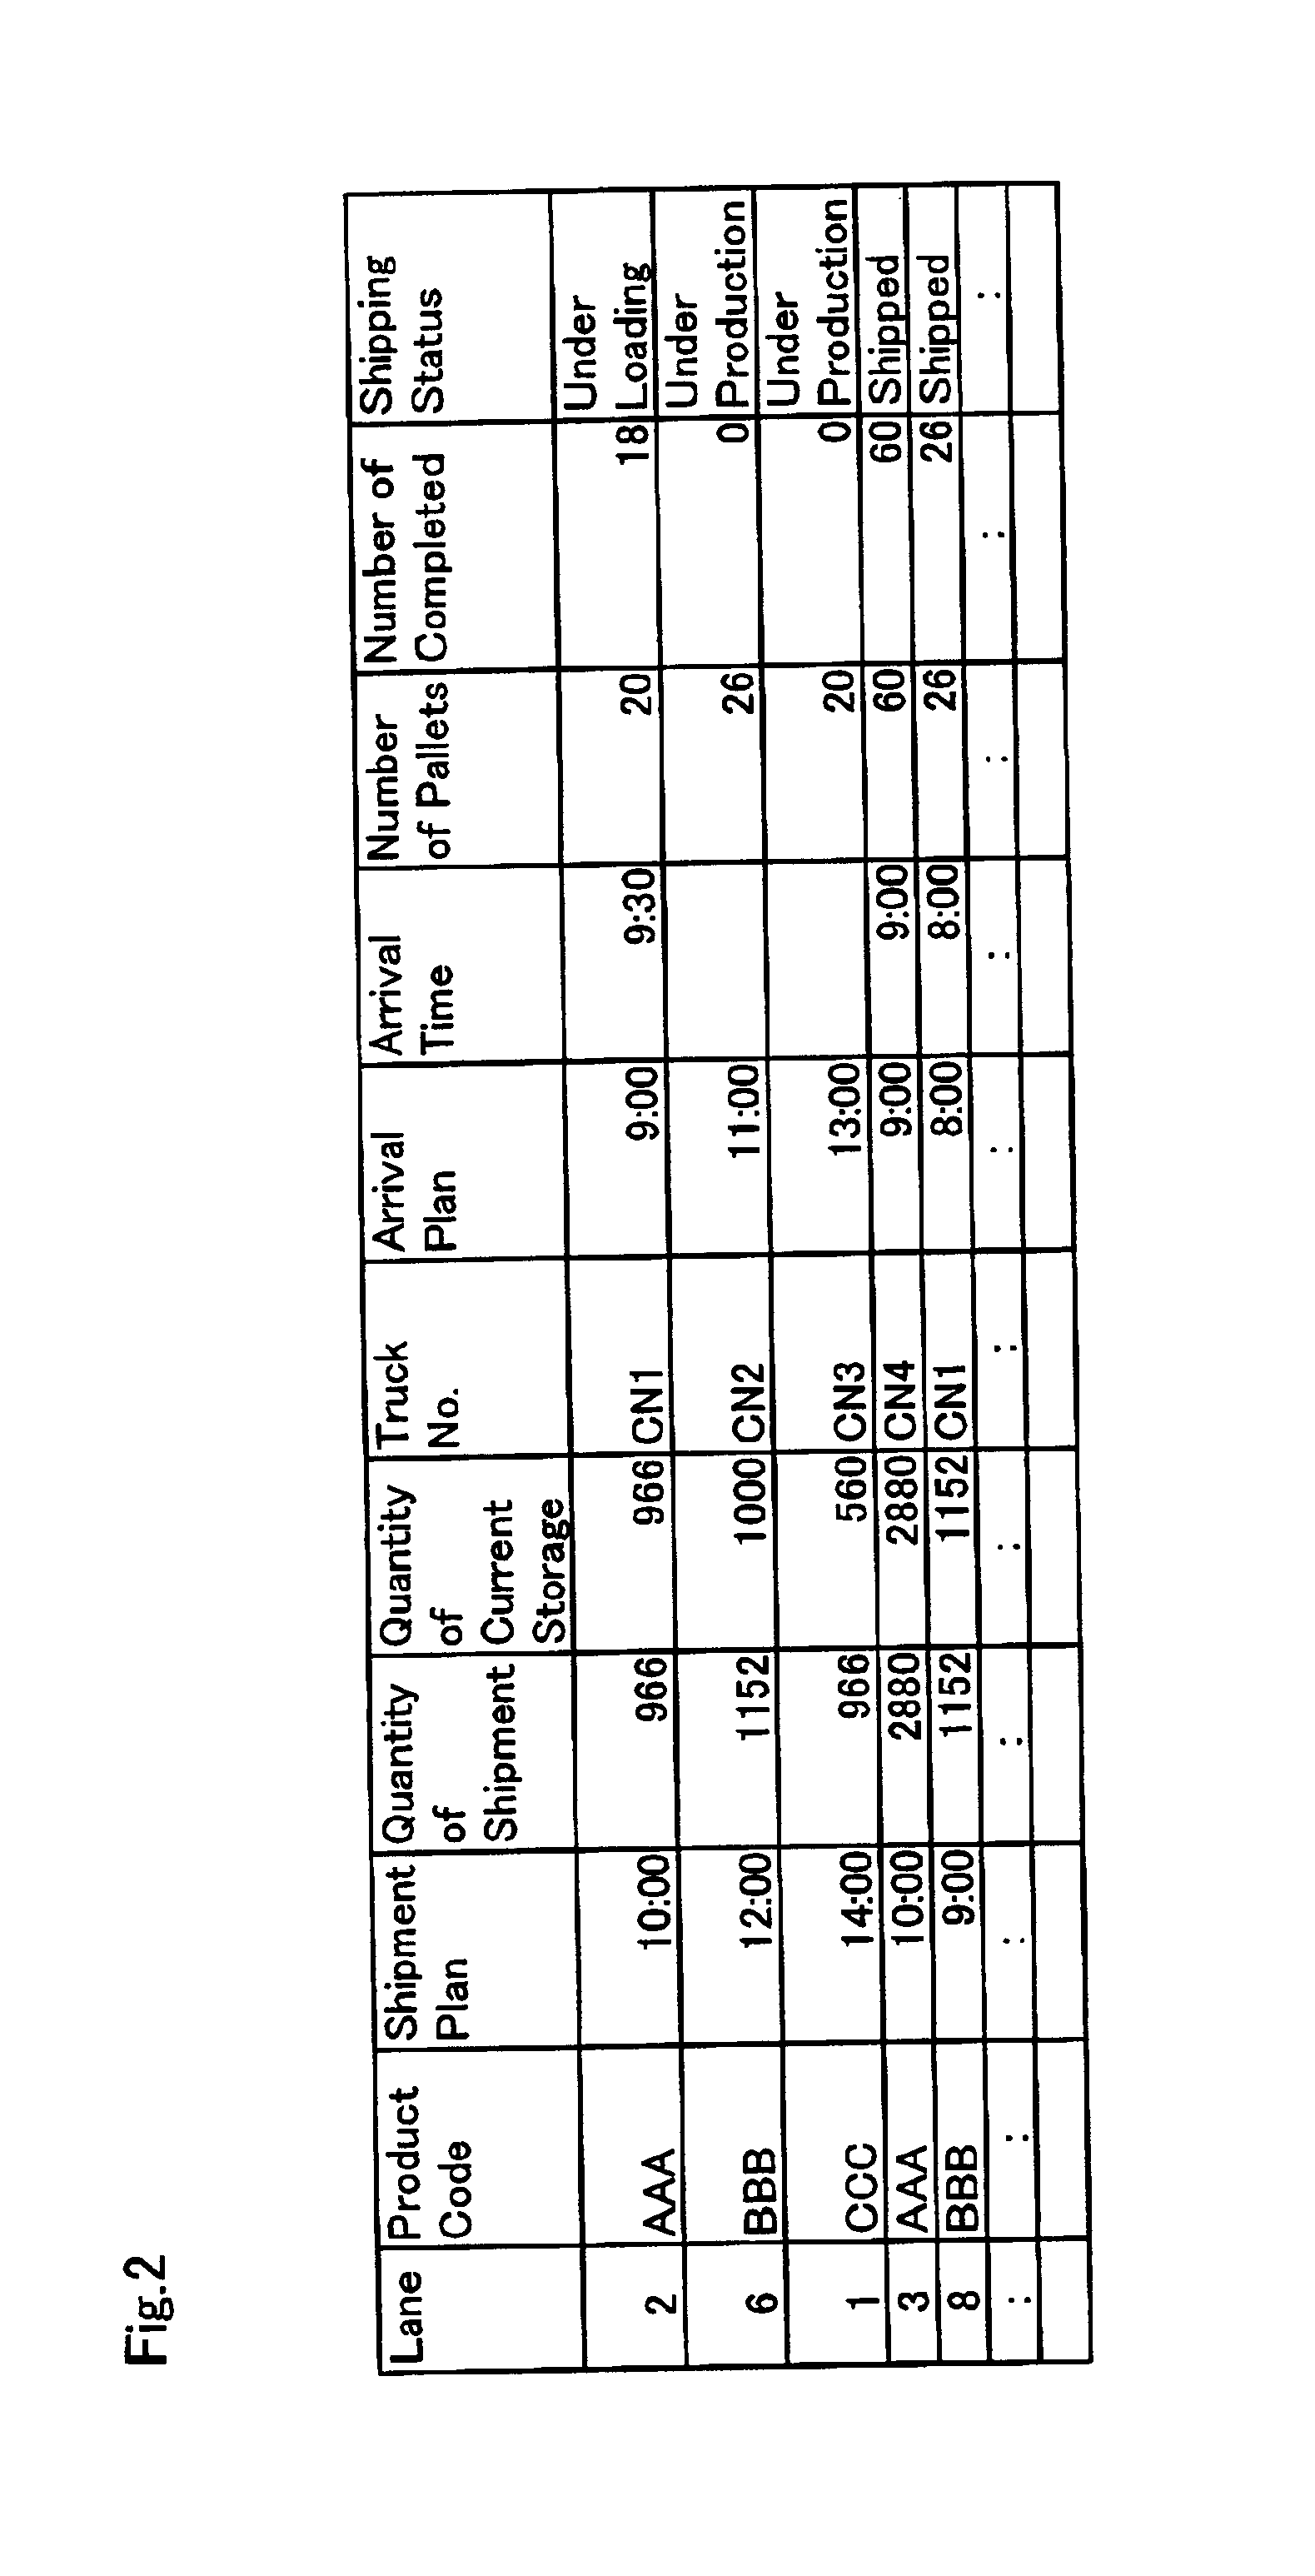 Management of working status with large-scaled display